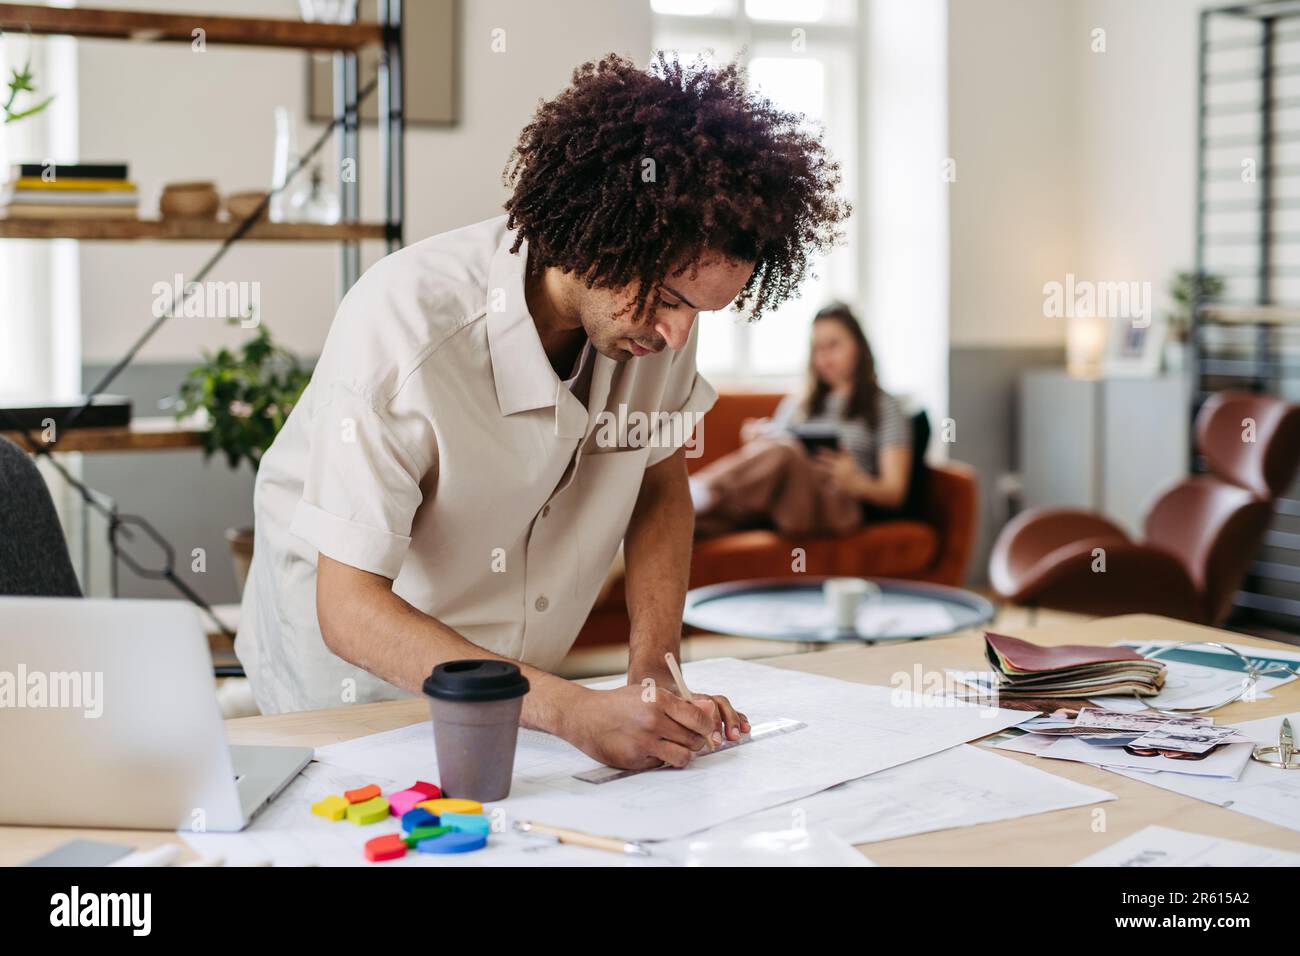 Young multiracial man drawing something in designers studio. Stock Photo